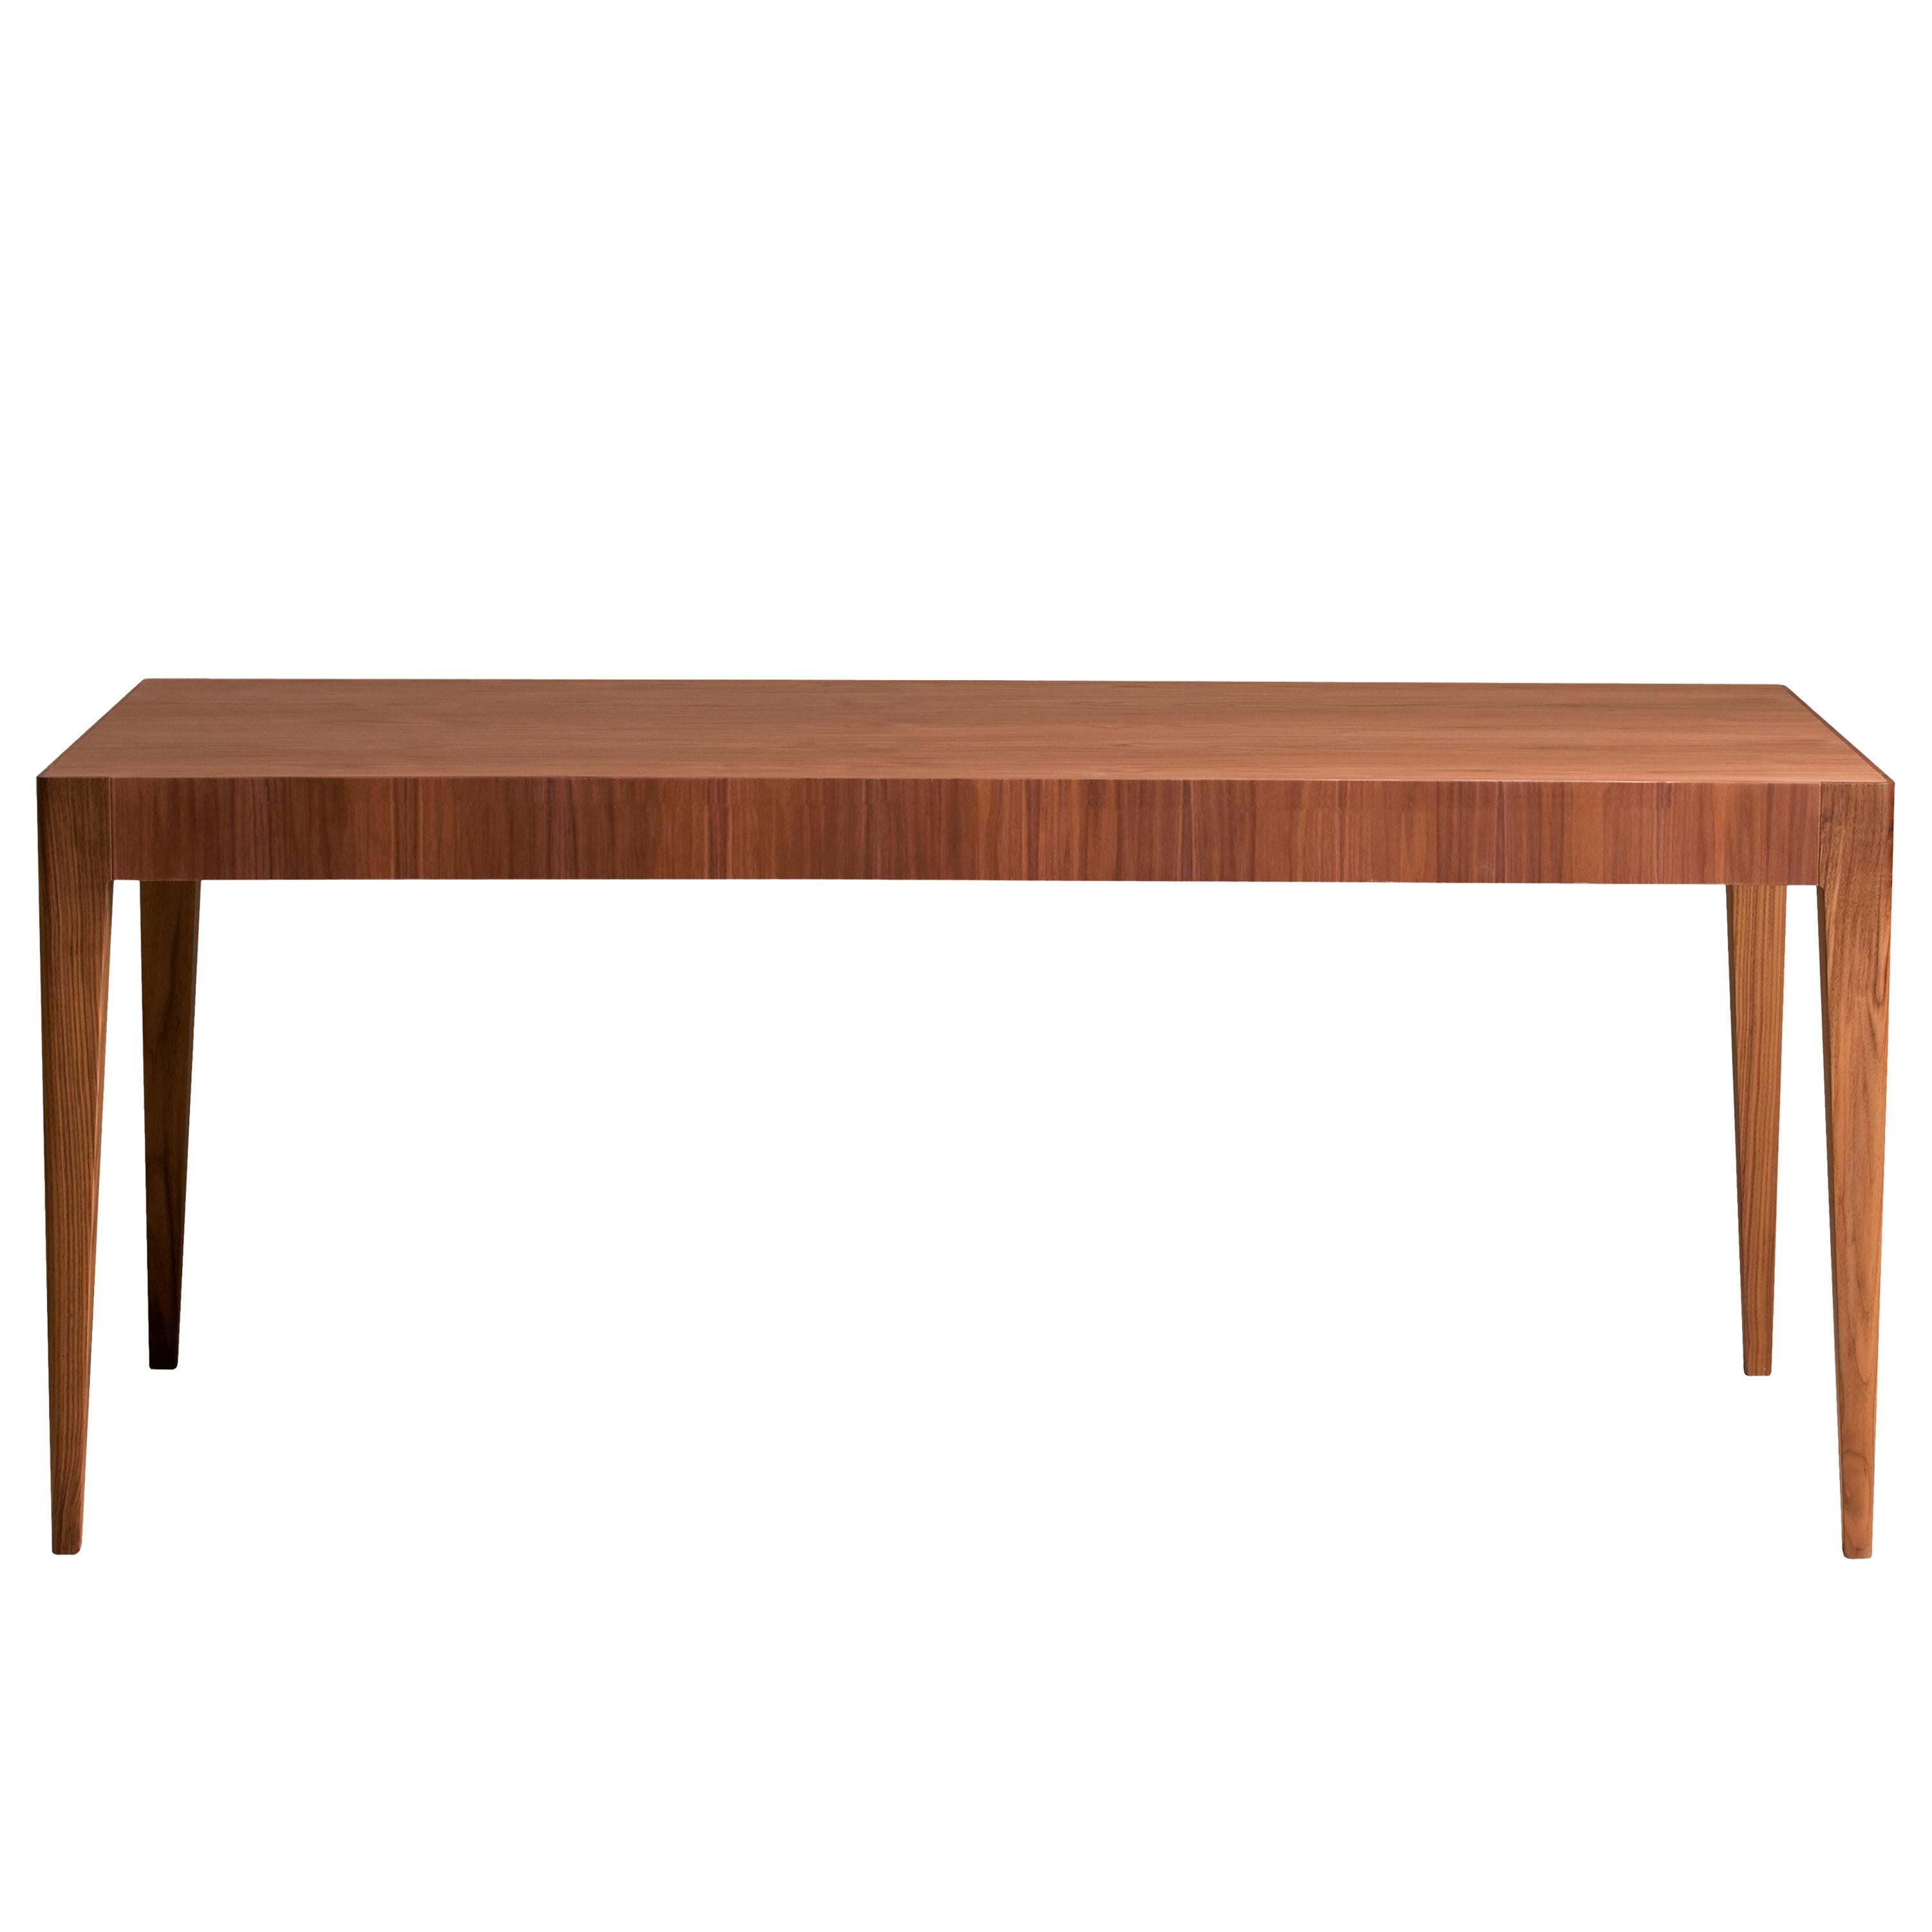 Malibù, extendable Dining Table in Ash or Canaletto Walnut Wood, by Morelato